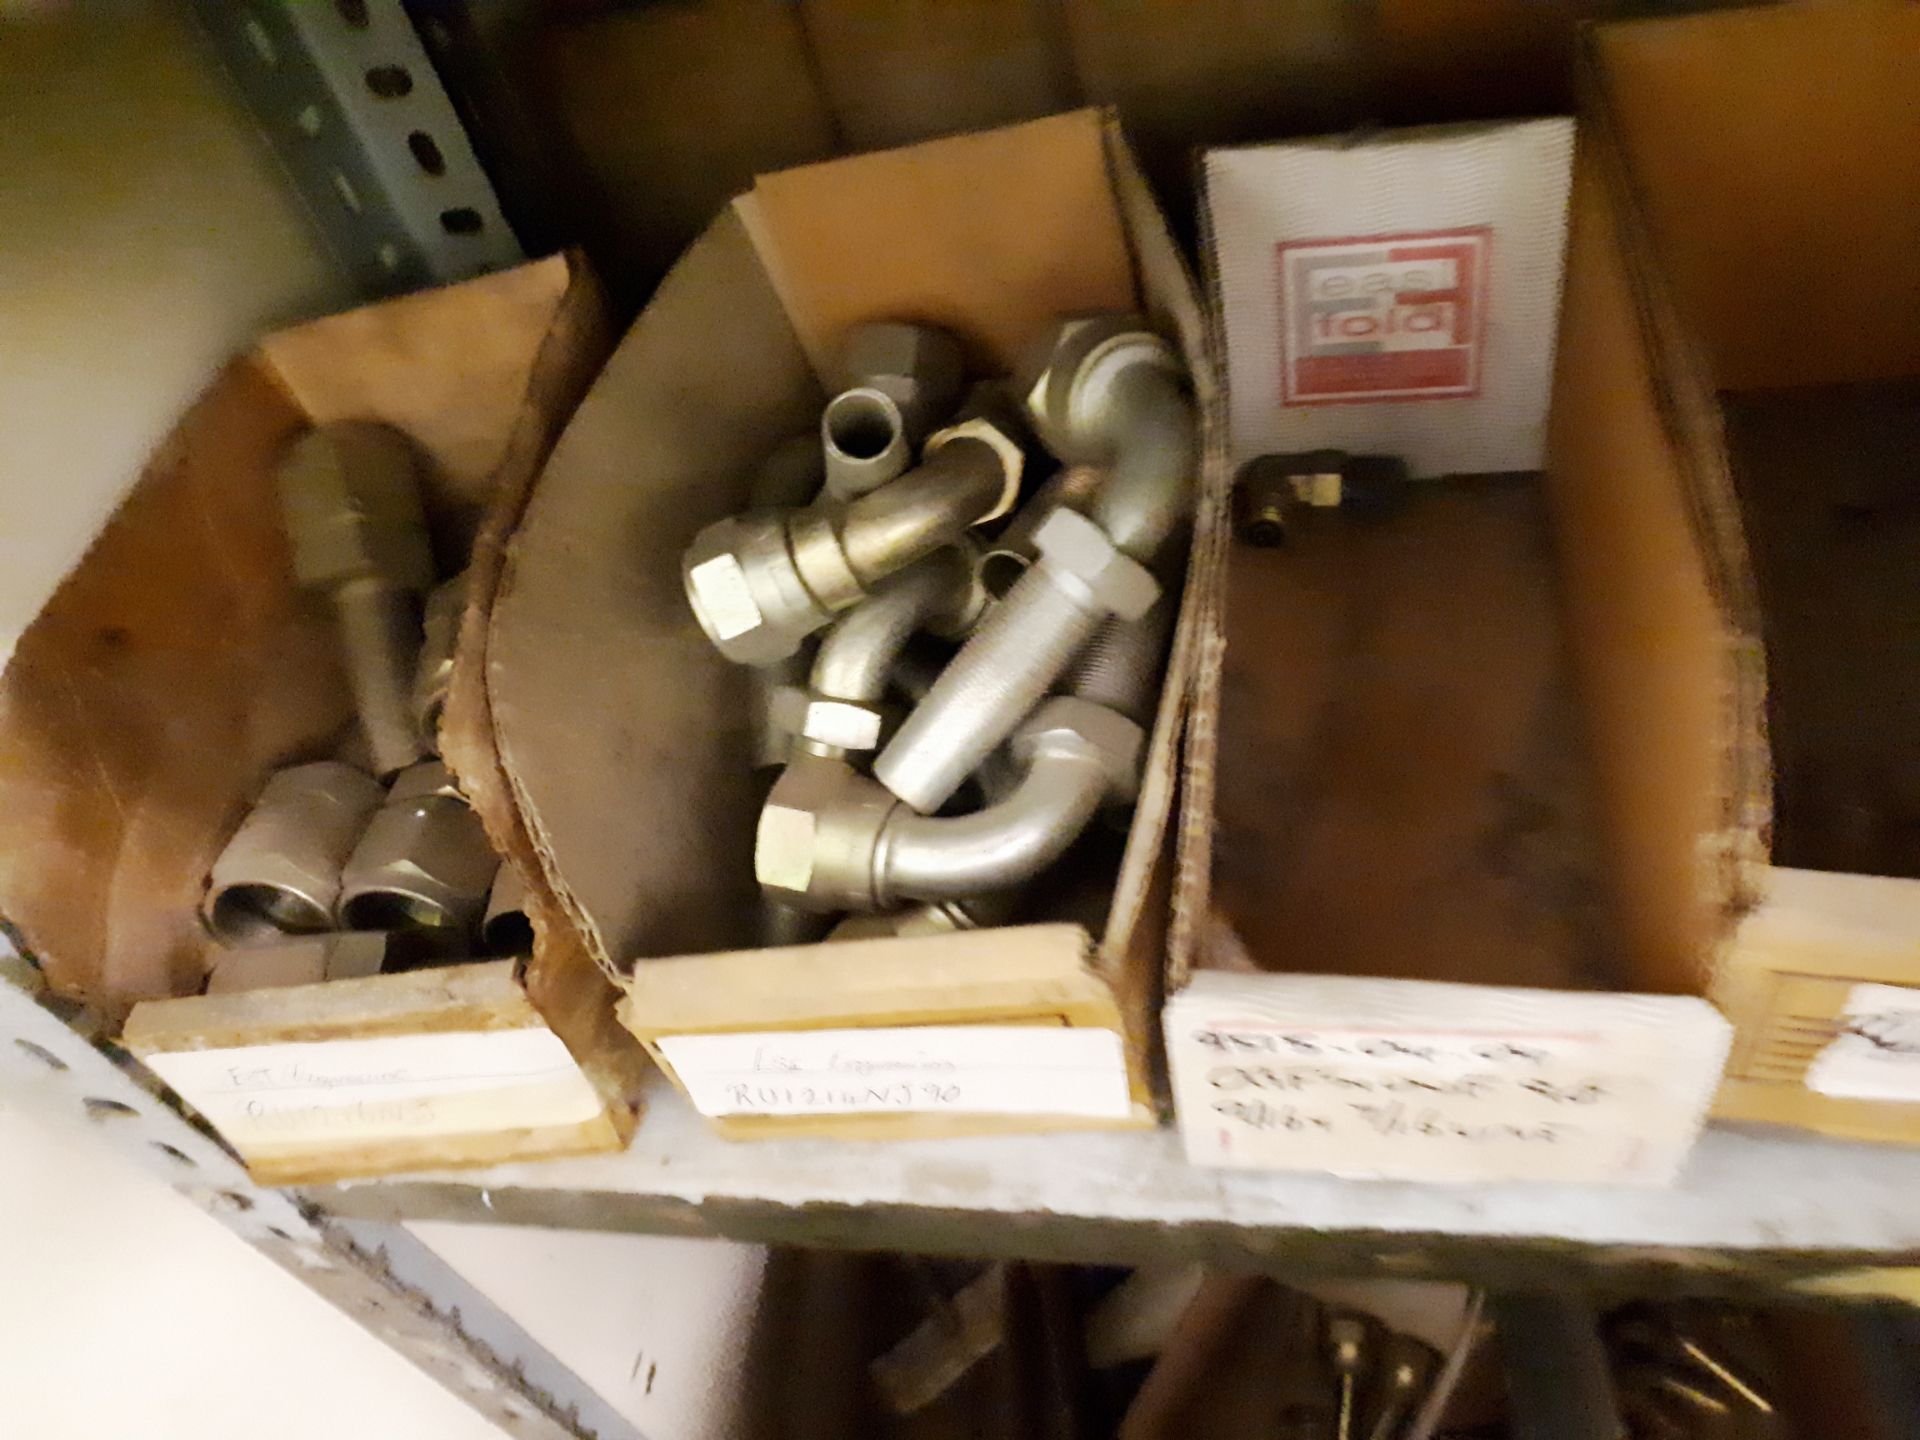 7 Bays of Steel Shelving & Contents of Various Low Pressure Fittings including Ball Valves, - Image 10 of 10